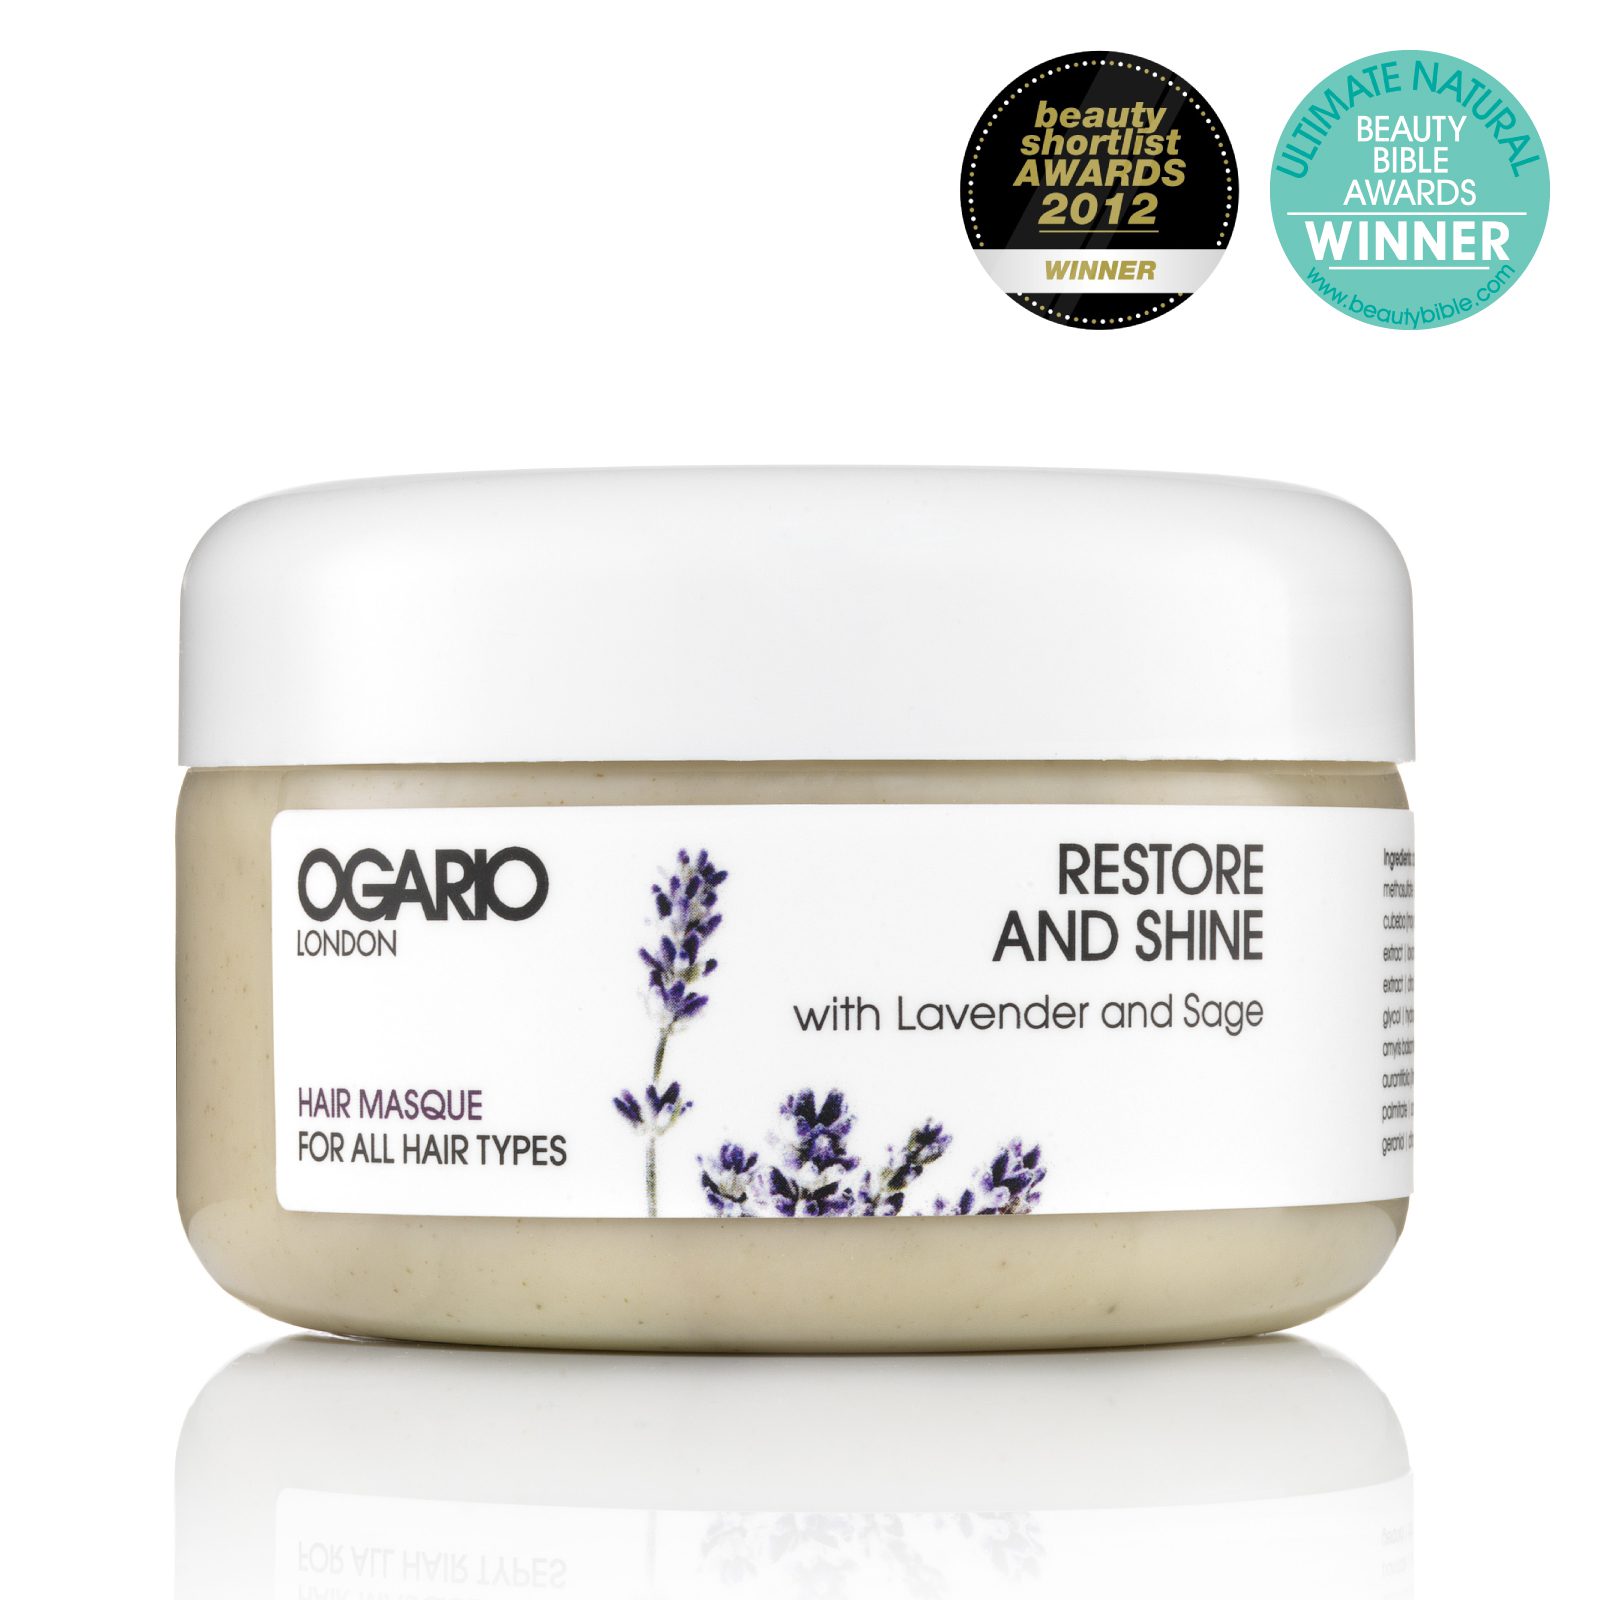 Restore and Shine Hair Masque; Best treatment for dry, brittle hair